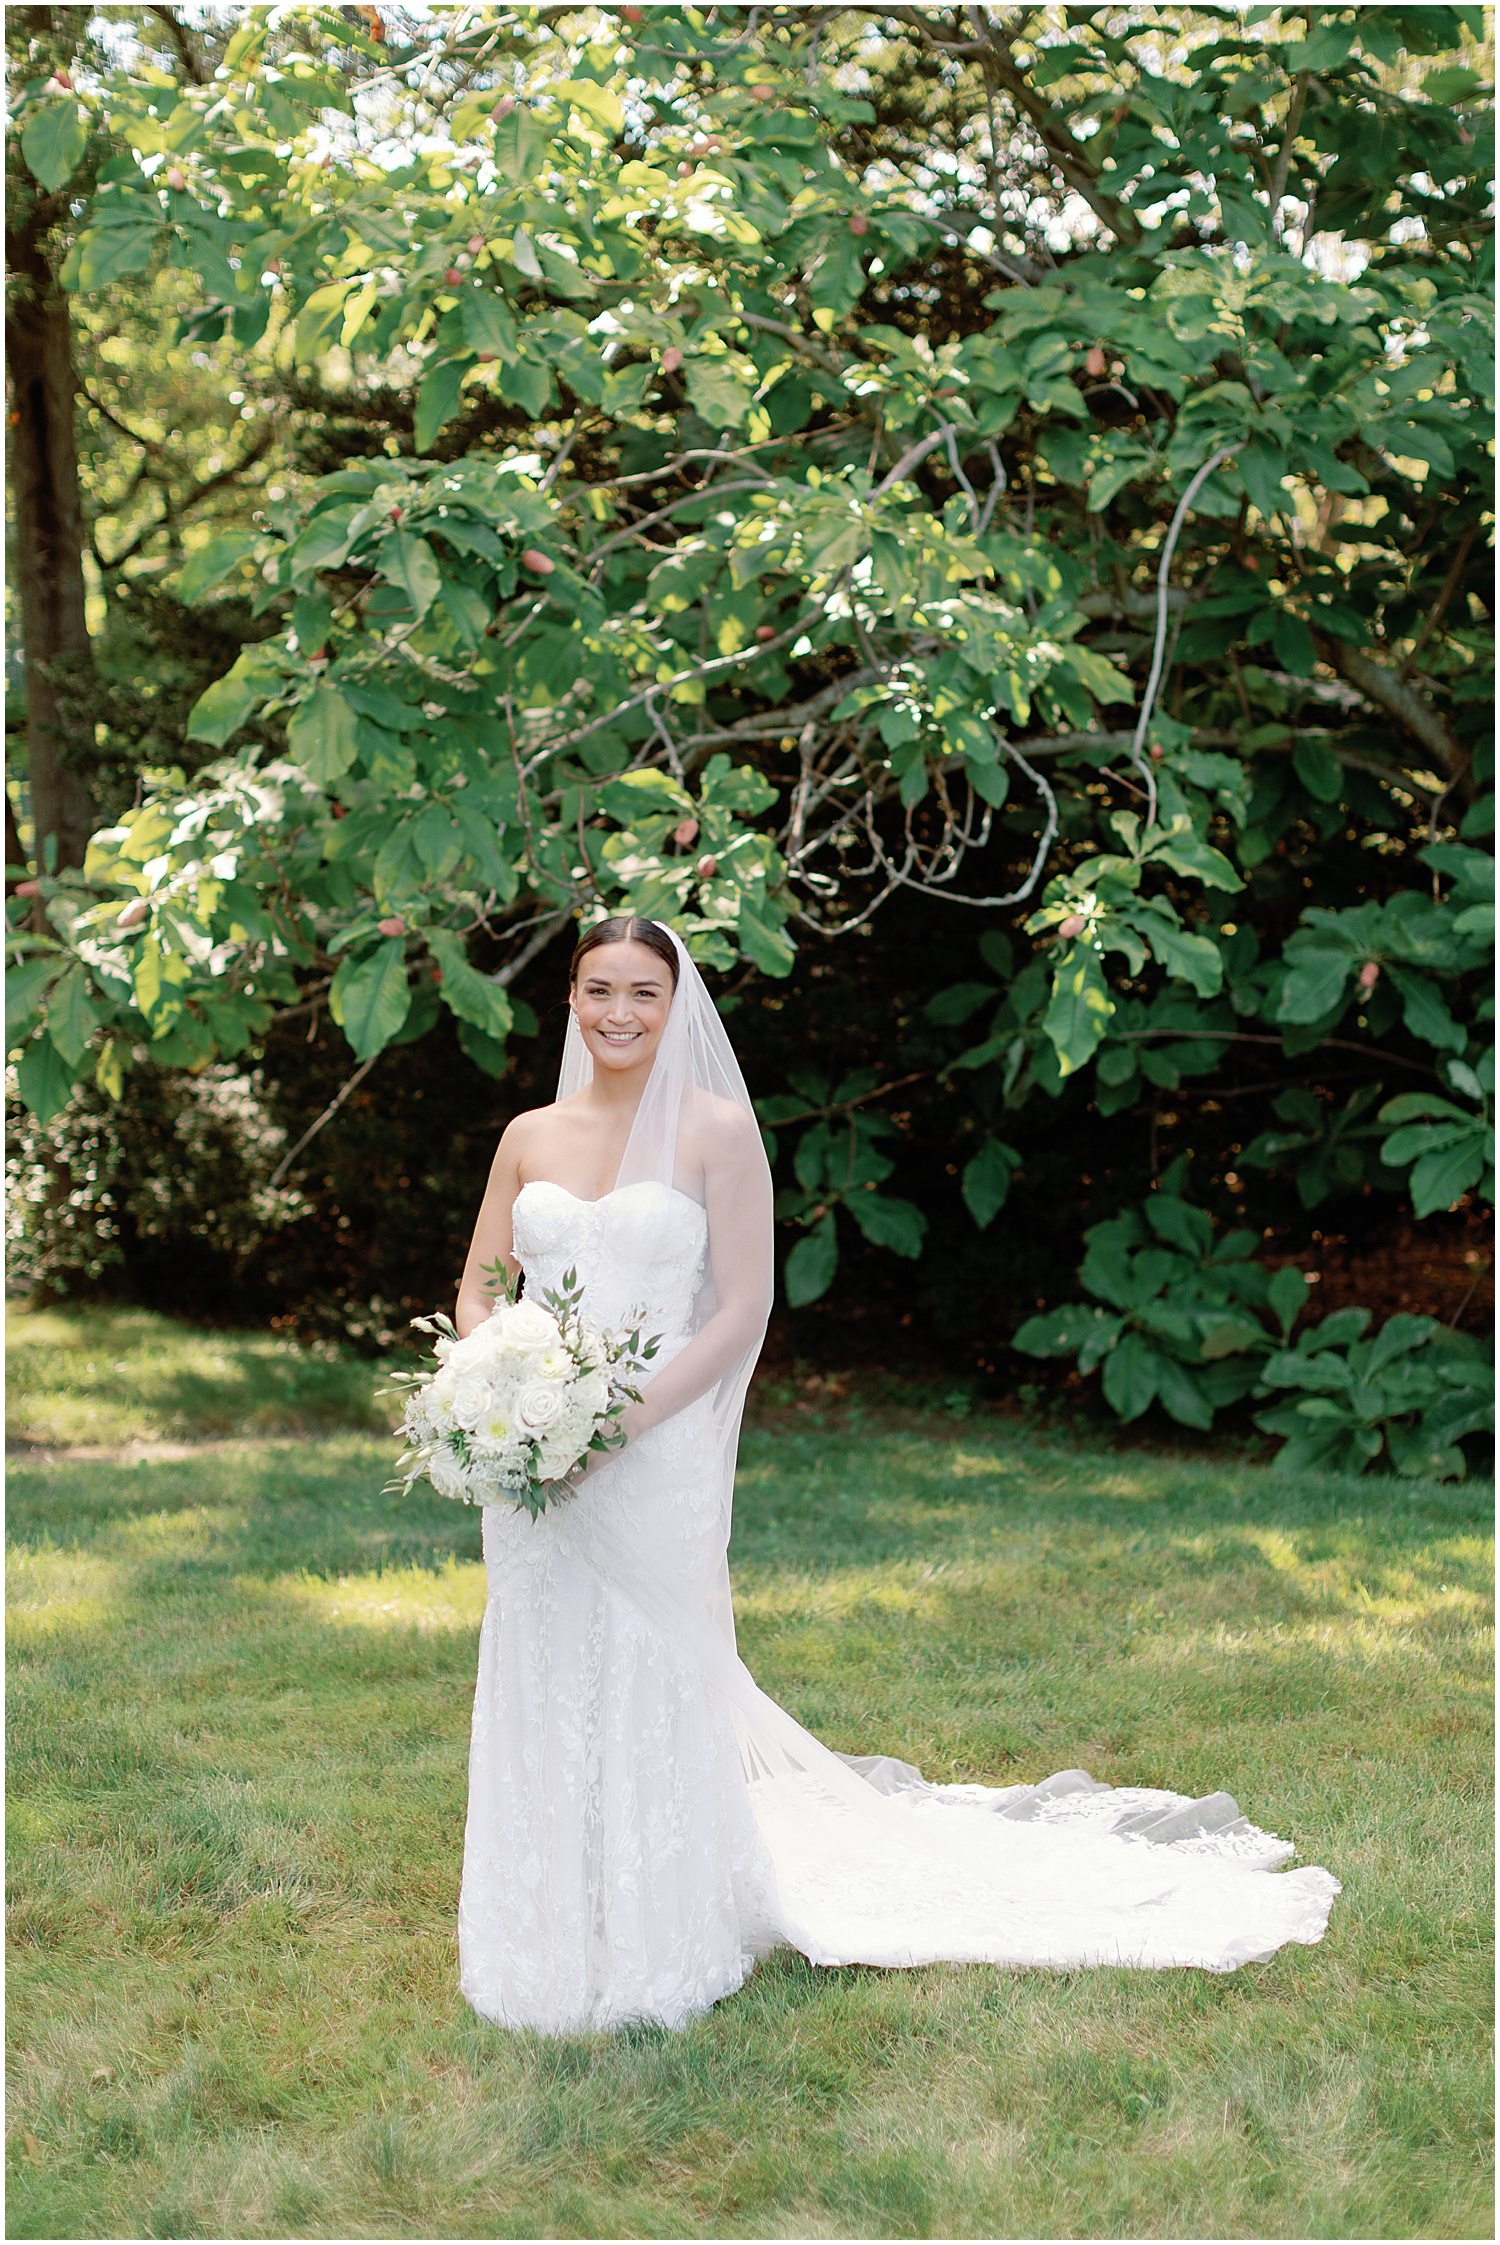 Made with Love wedding dress at Glen Magna Farms Wedding in Danvers Massachusetts